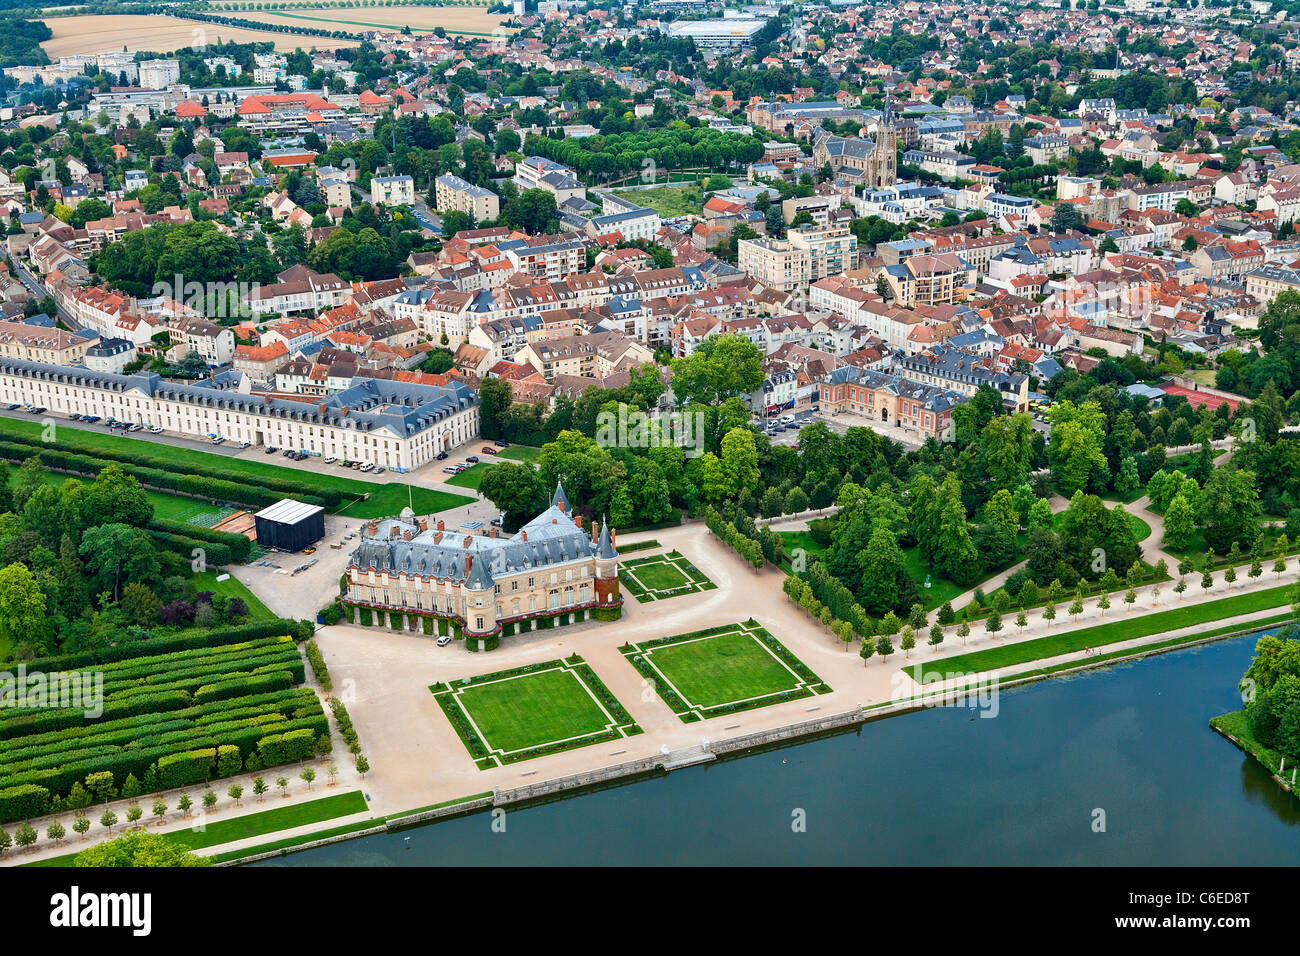 Europe France Yvelines Aerial View Of Chateau De Rambouillet Stock Photo Alamy